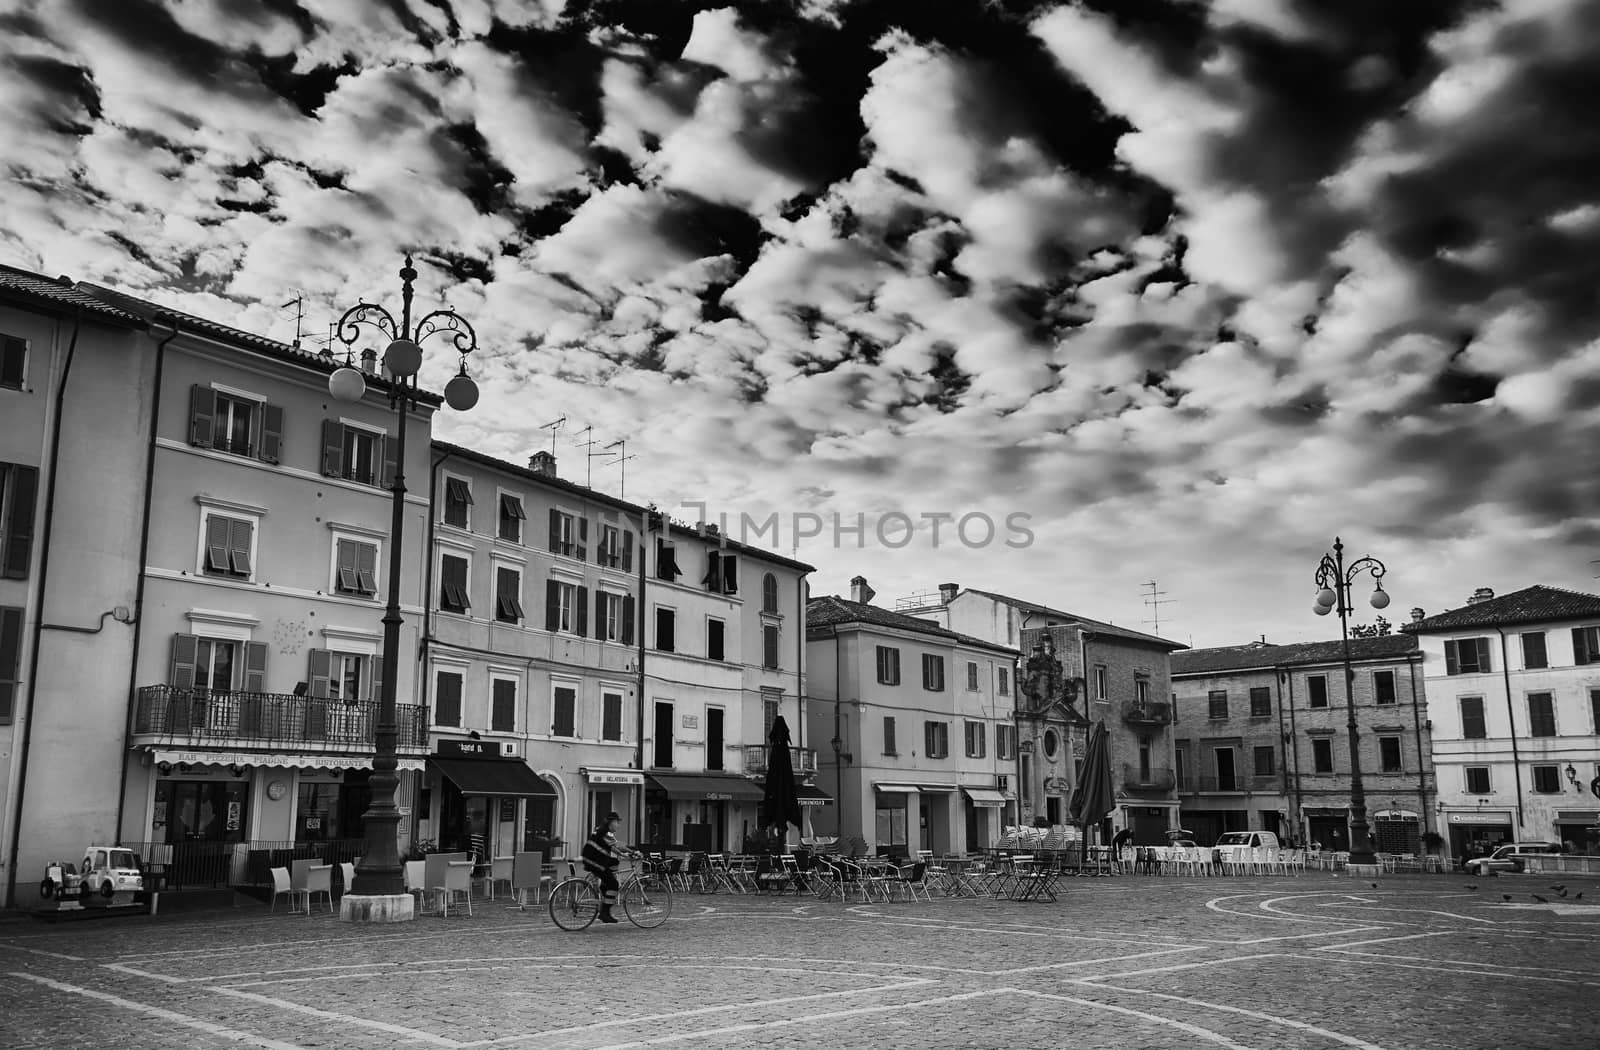 a biker pedals through a central square in a small italian town early in the morning